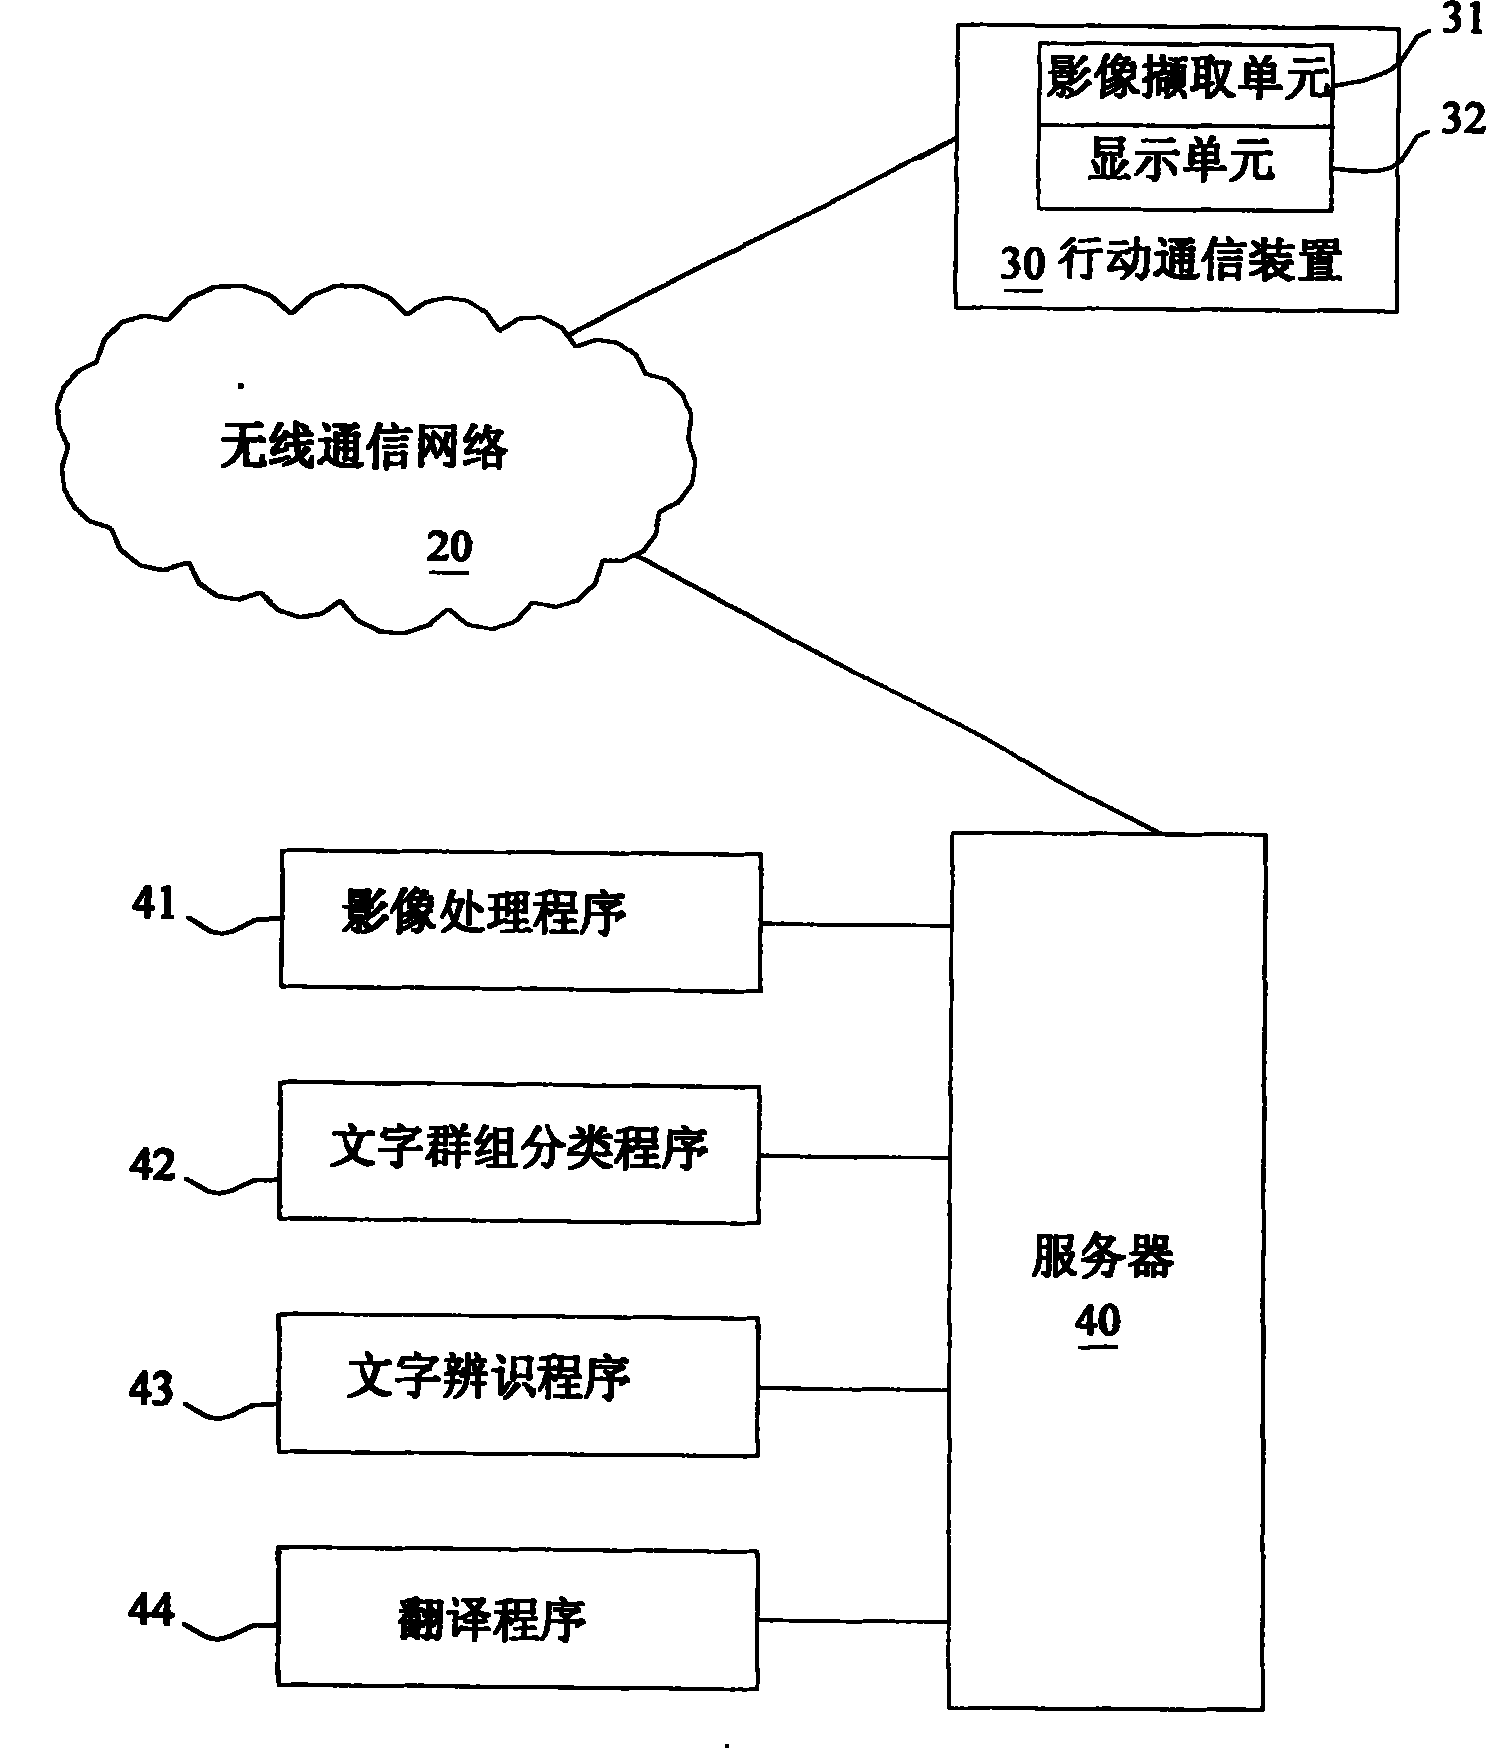 Method and system for translating video text based on mobile communication device